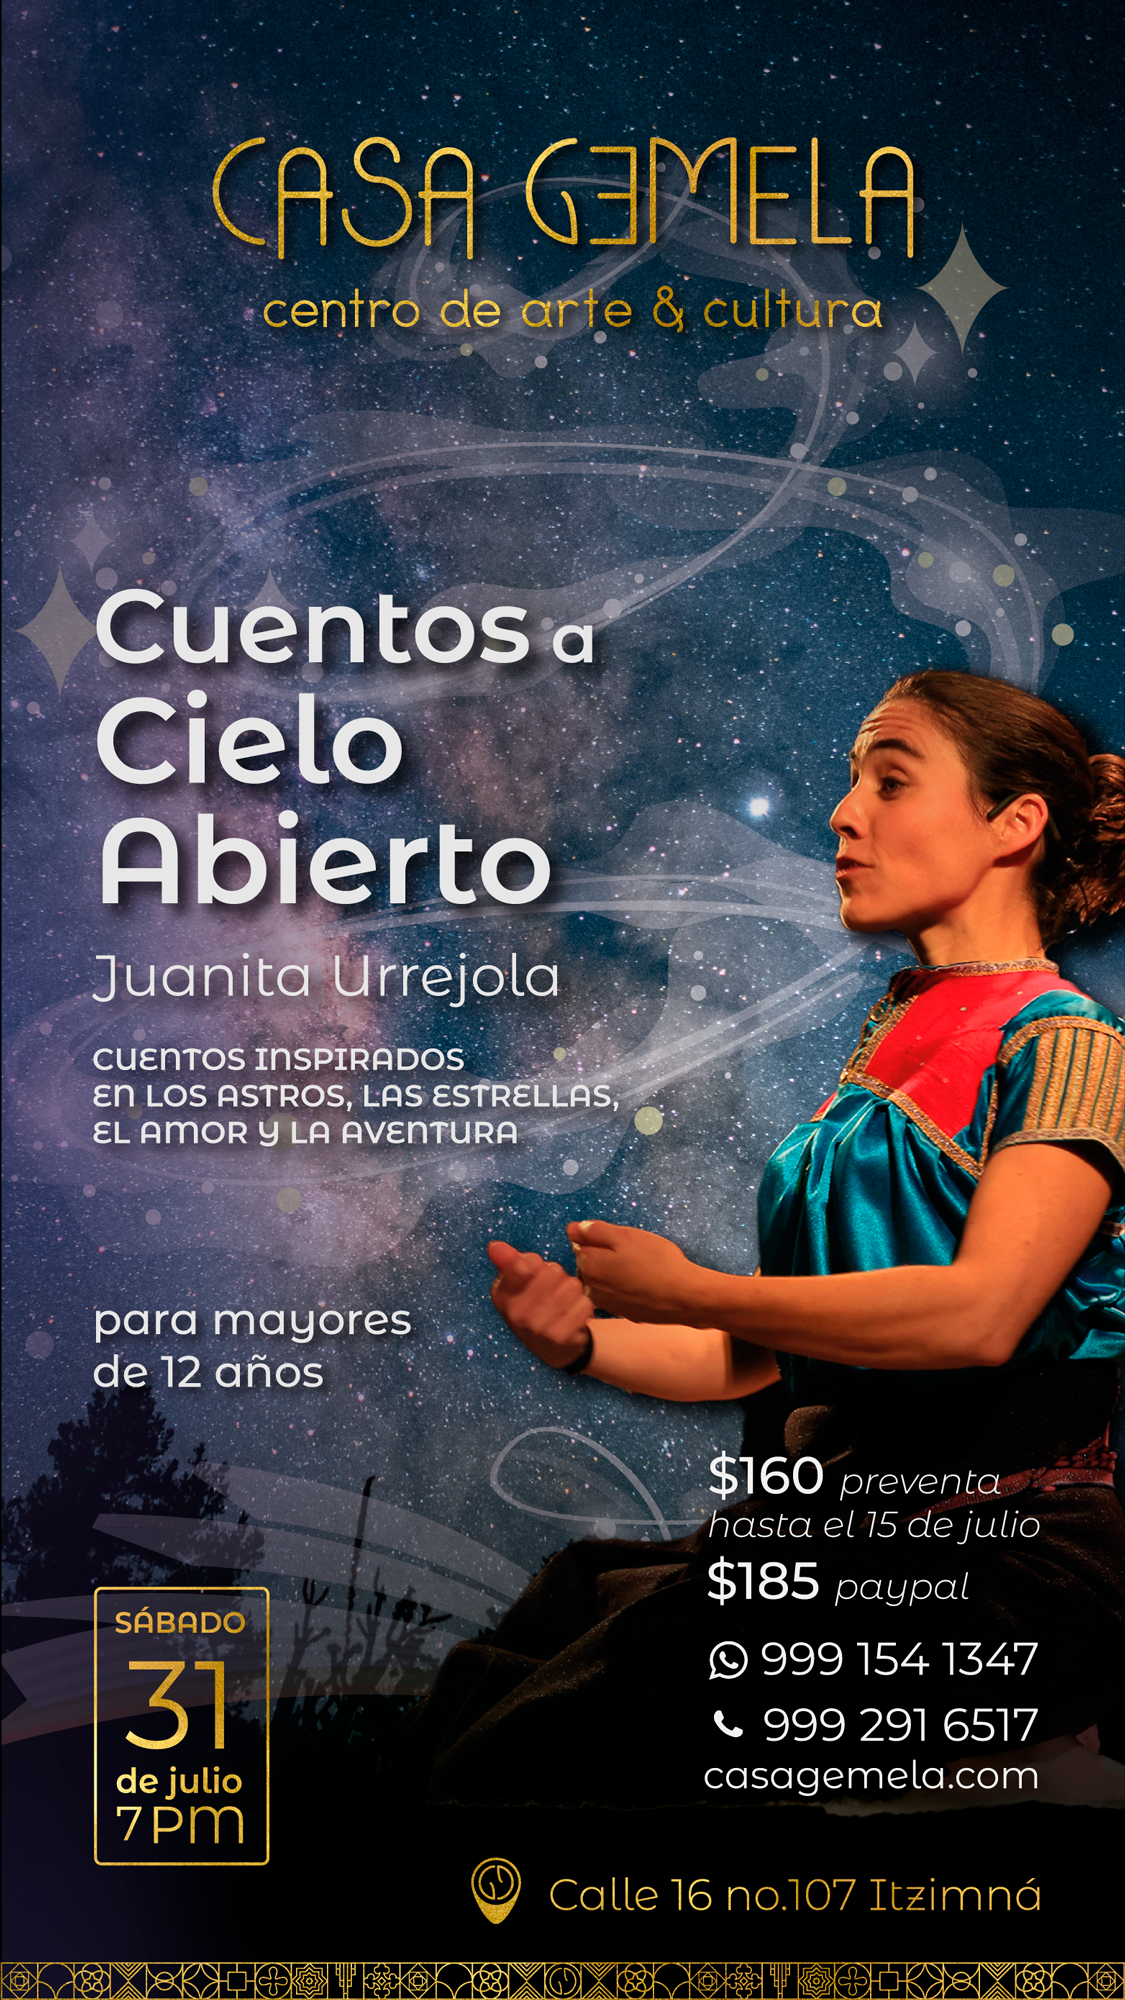 <span class='spanish'>Teatro <br/> Cuentos a cielo abierto</span> <span class='english'>Theater <br/> Tales under the open sky</span>